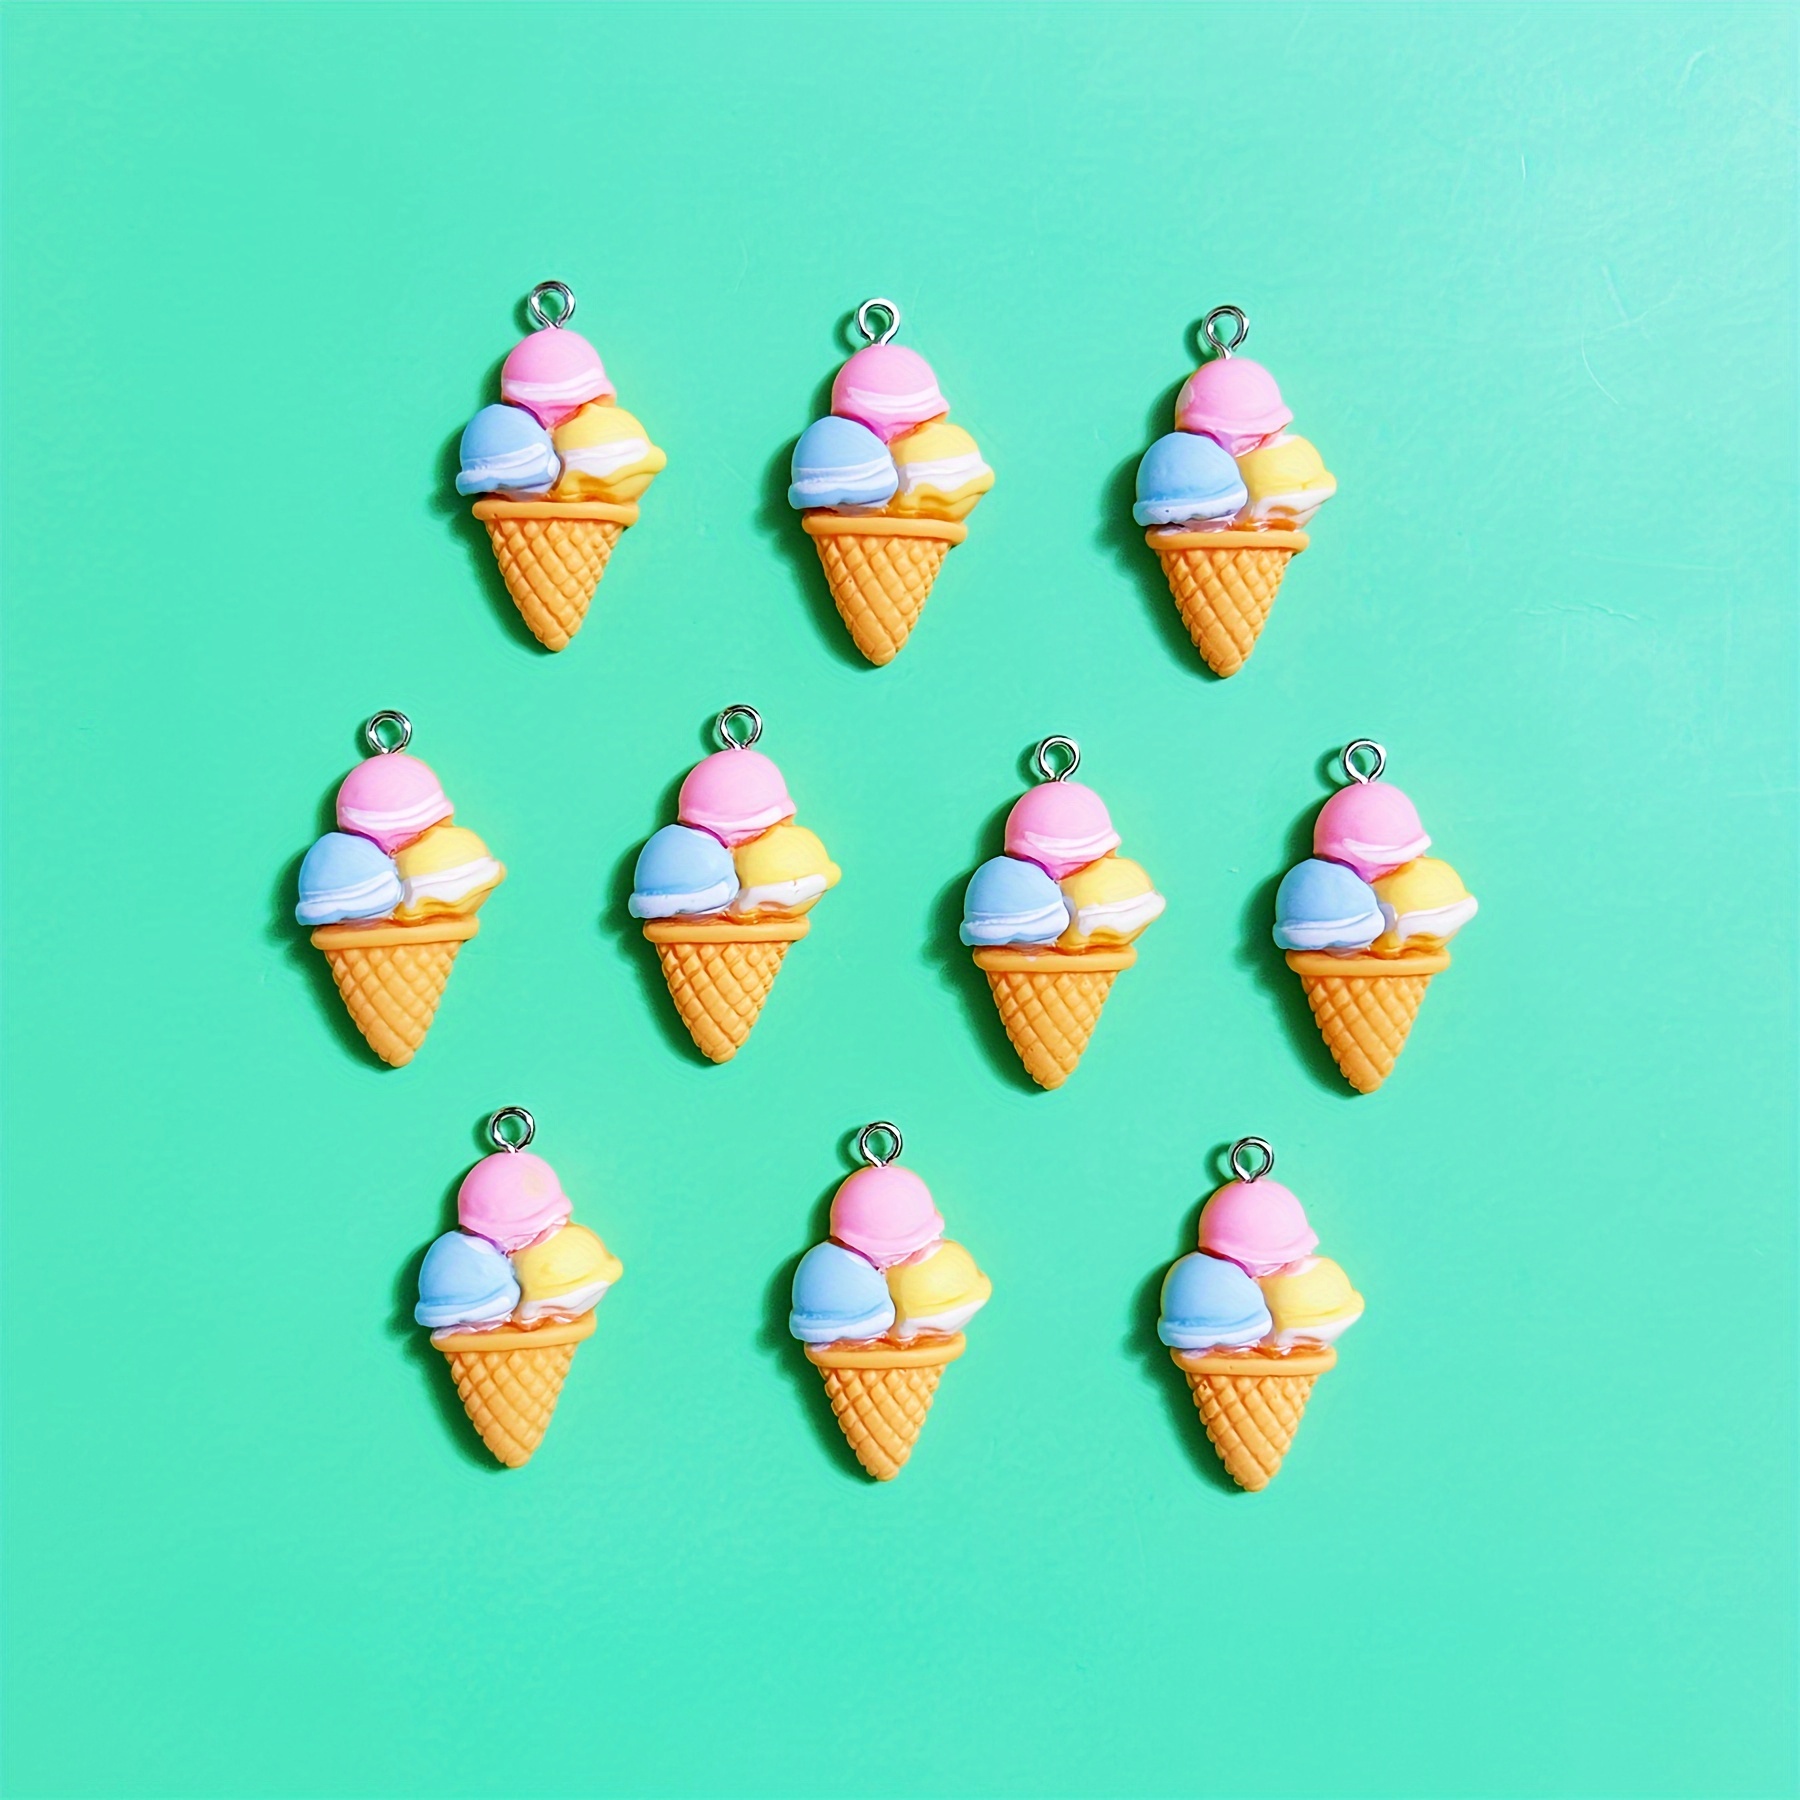 

10-piece Set Of Ice Cream Cone Charms, Multicolor Resin Pendant Accessories For Jewelry Making, Diy Earrings, Necklaces, Bracelets, Keychains, And Creative Gift Bag Charms